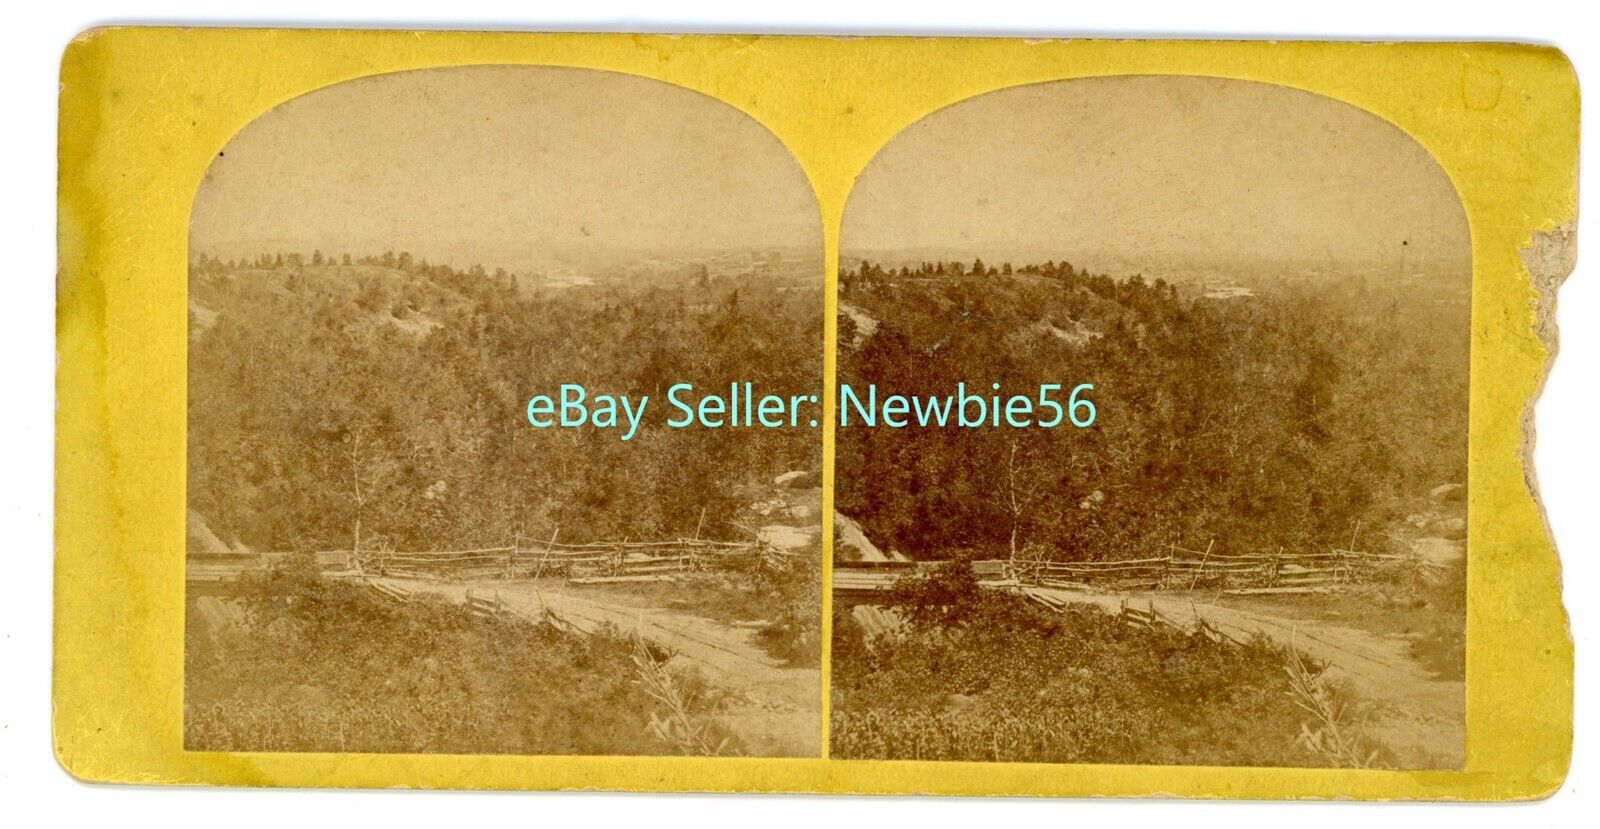 Wilmington NY - ROAD FROM FLUME - c1870s Stereoview Adirondacks nr Whiteface